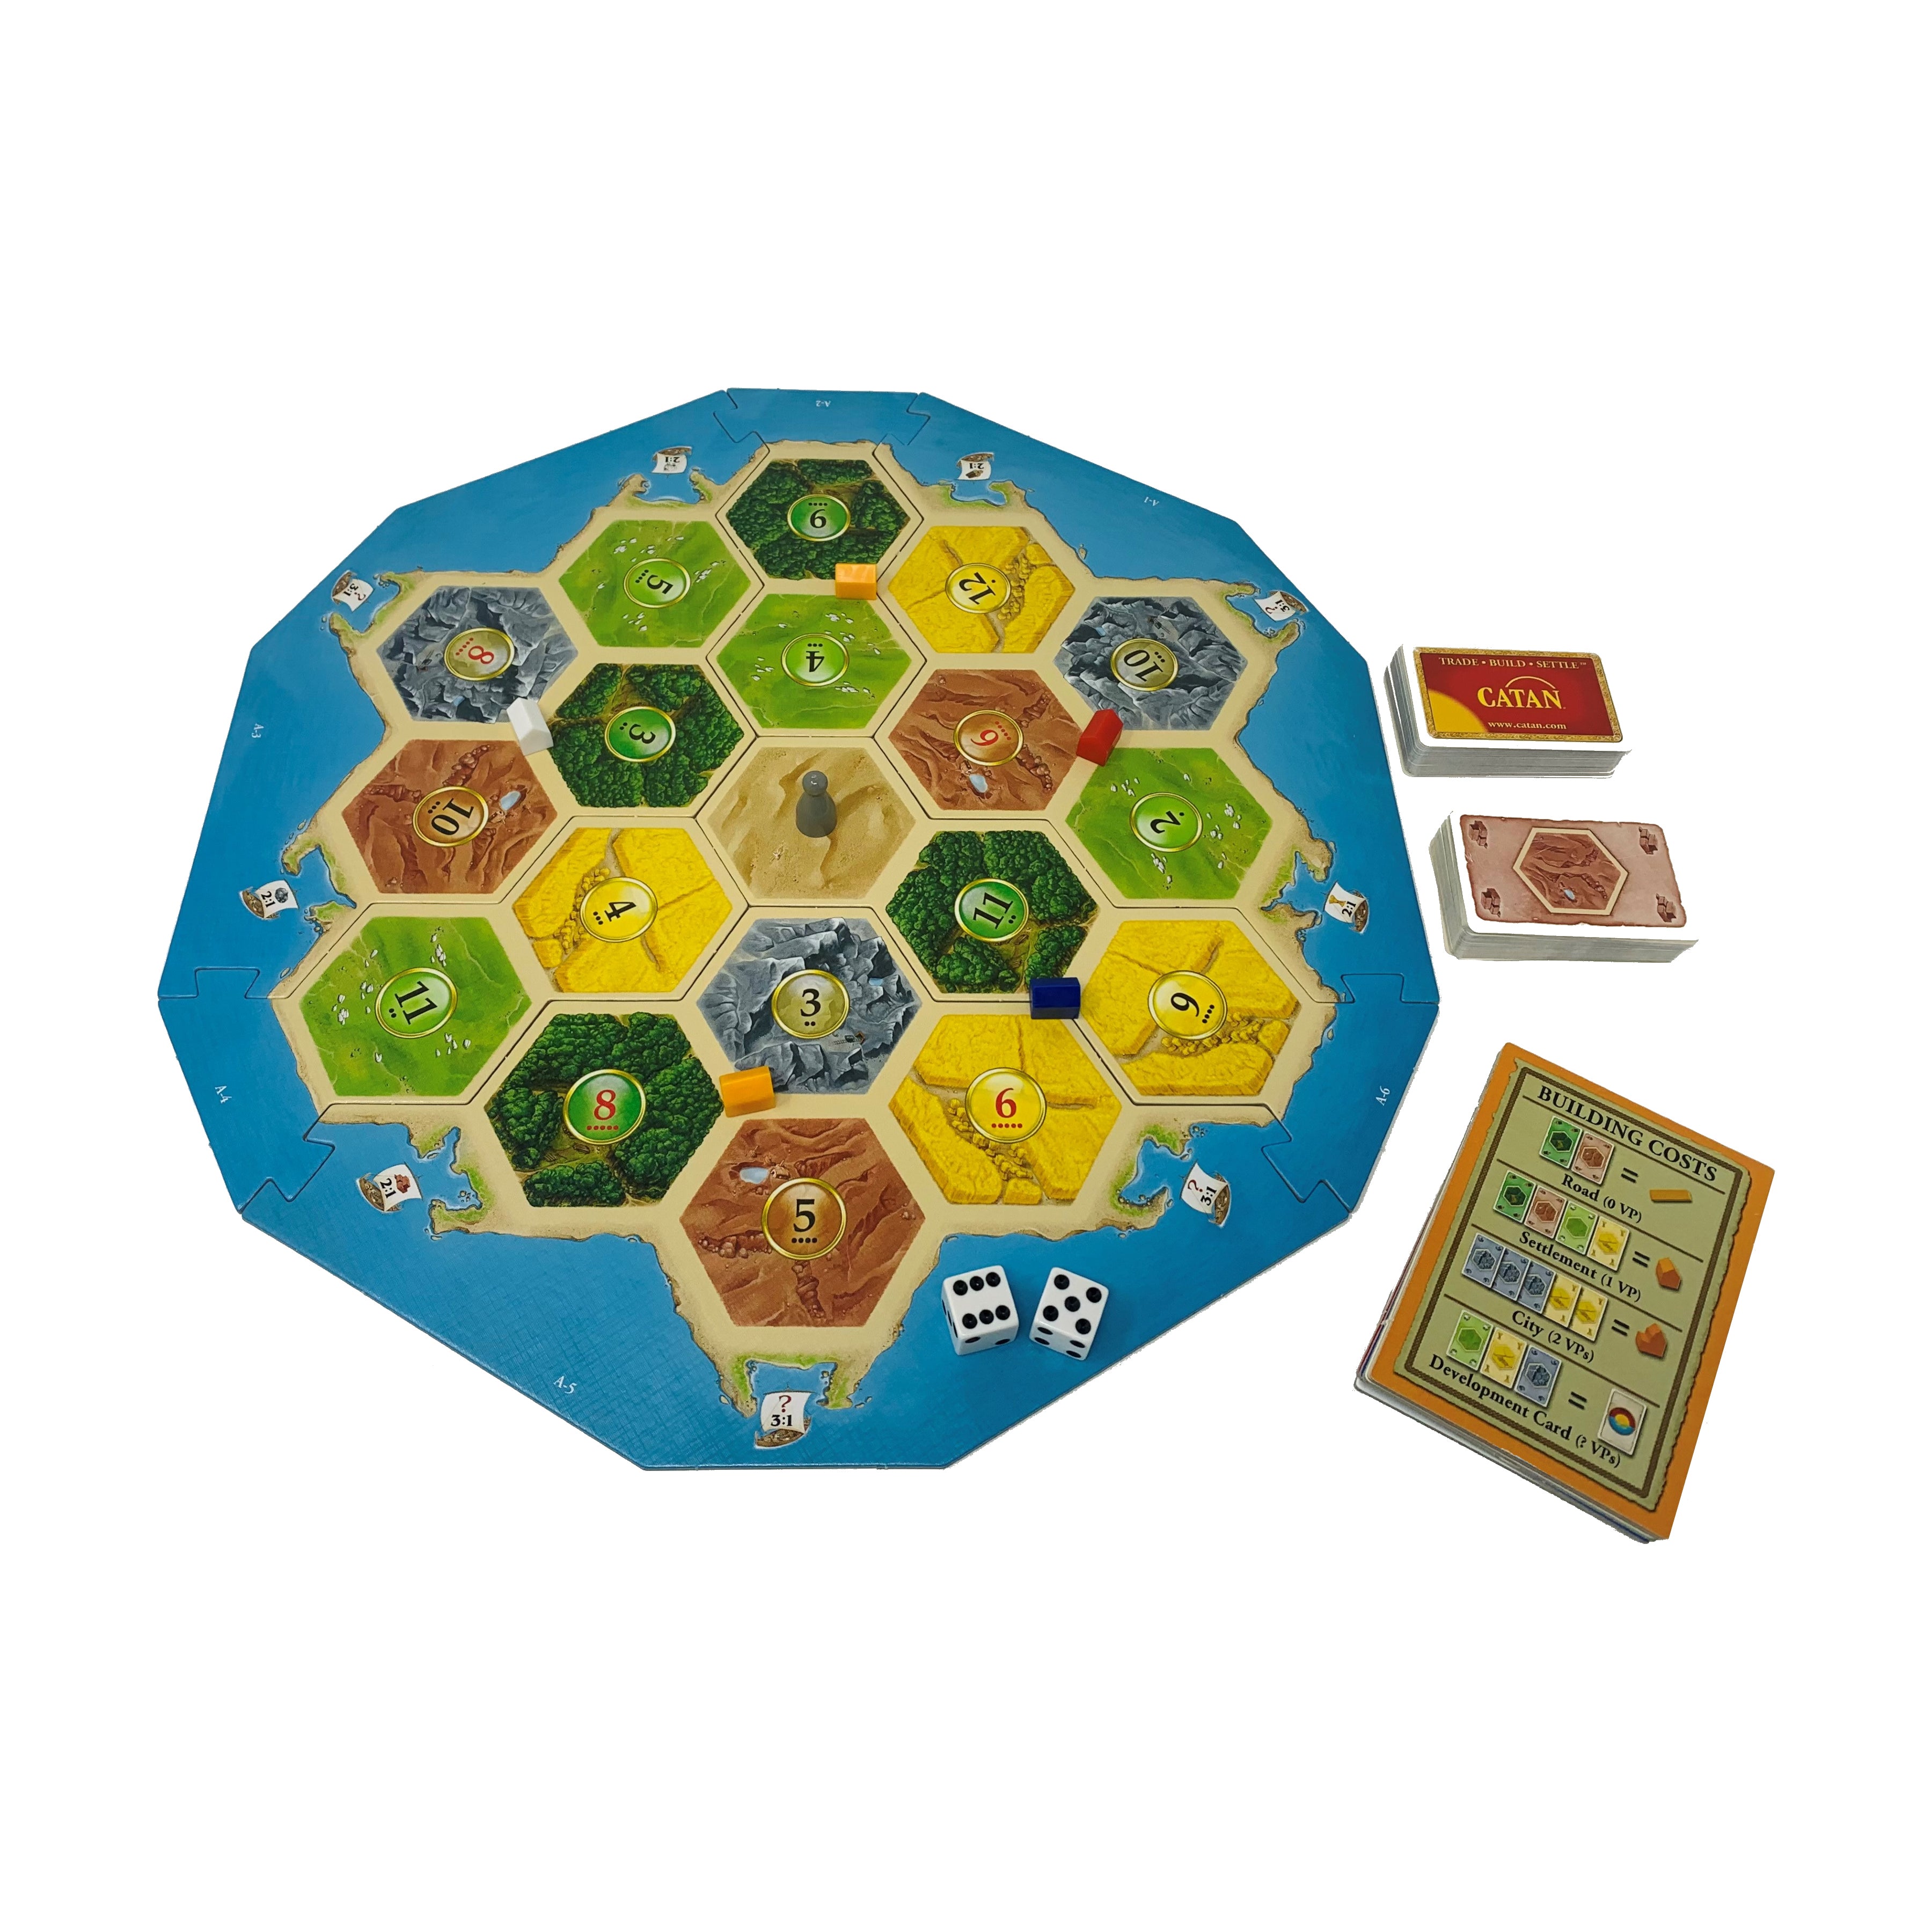 Rivals for Catan Deluxe - 2-Player Card Game, AreYouGame